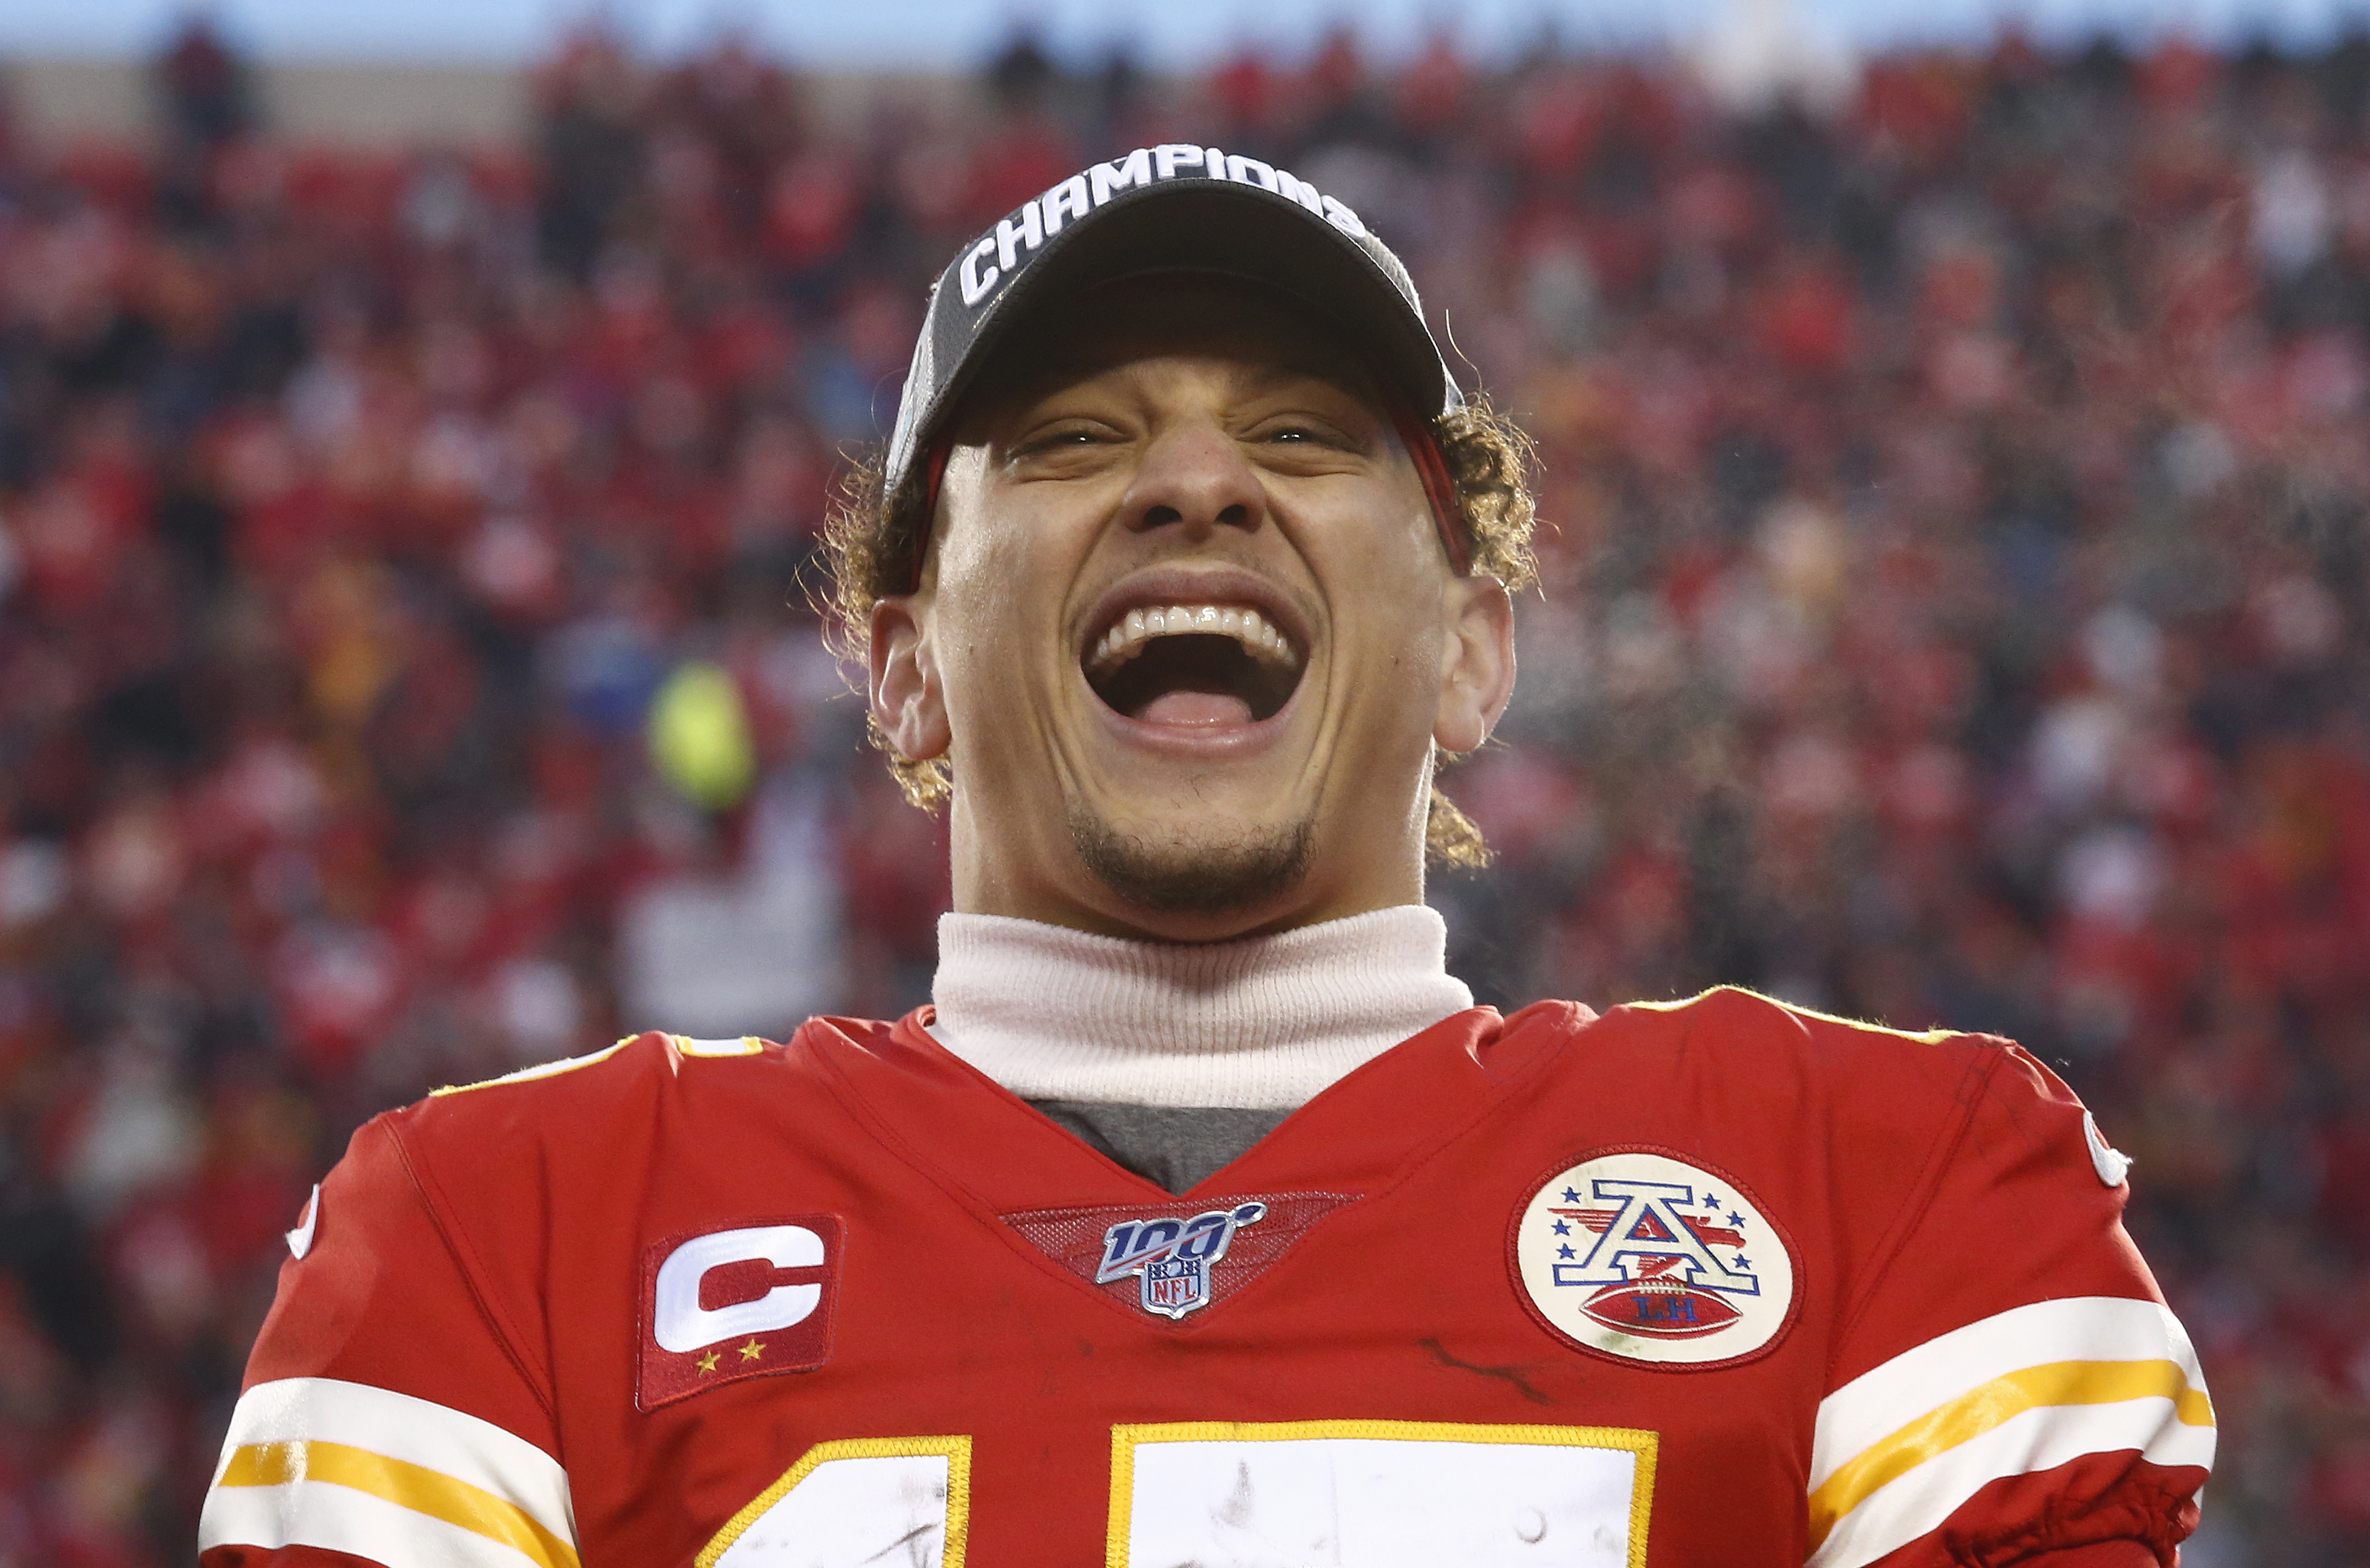 The making of Patrick Mahomes, the highest-paid man in sports